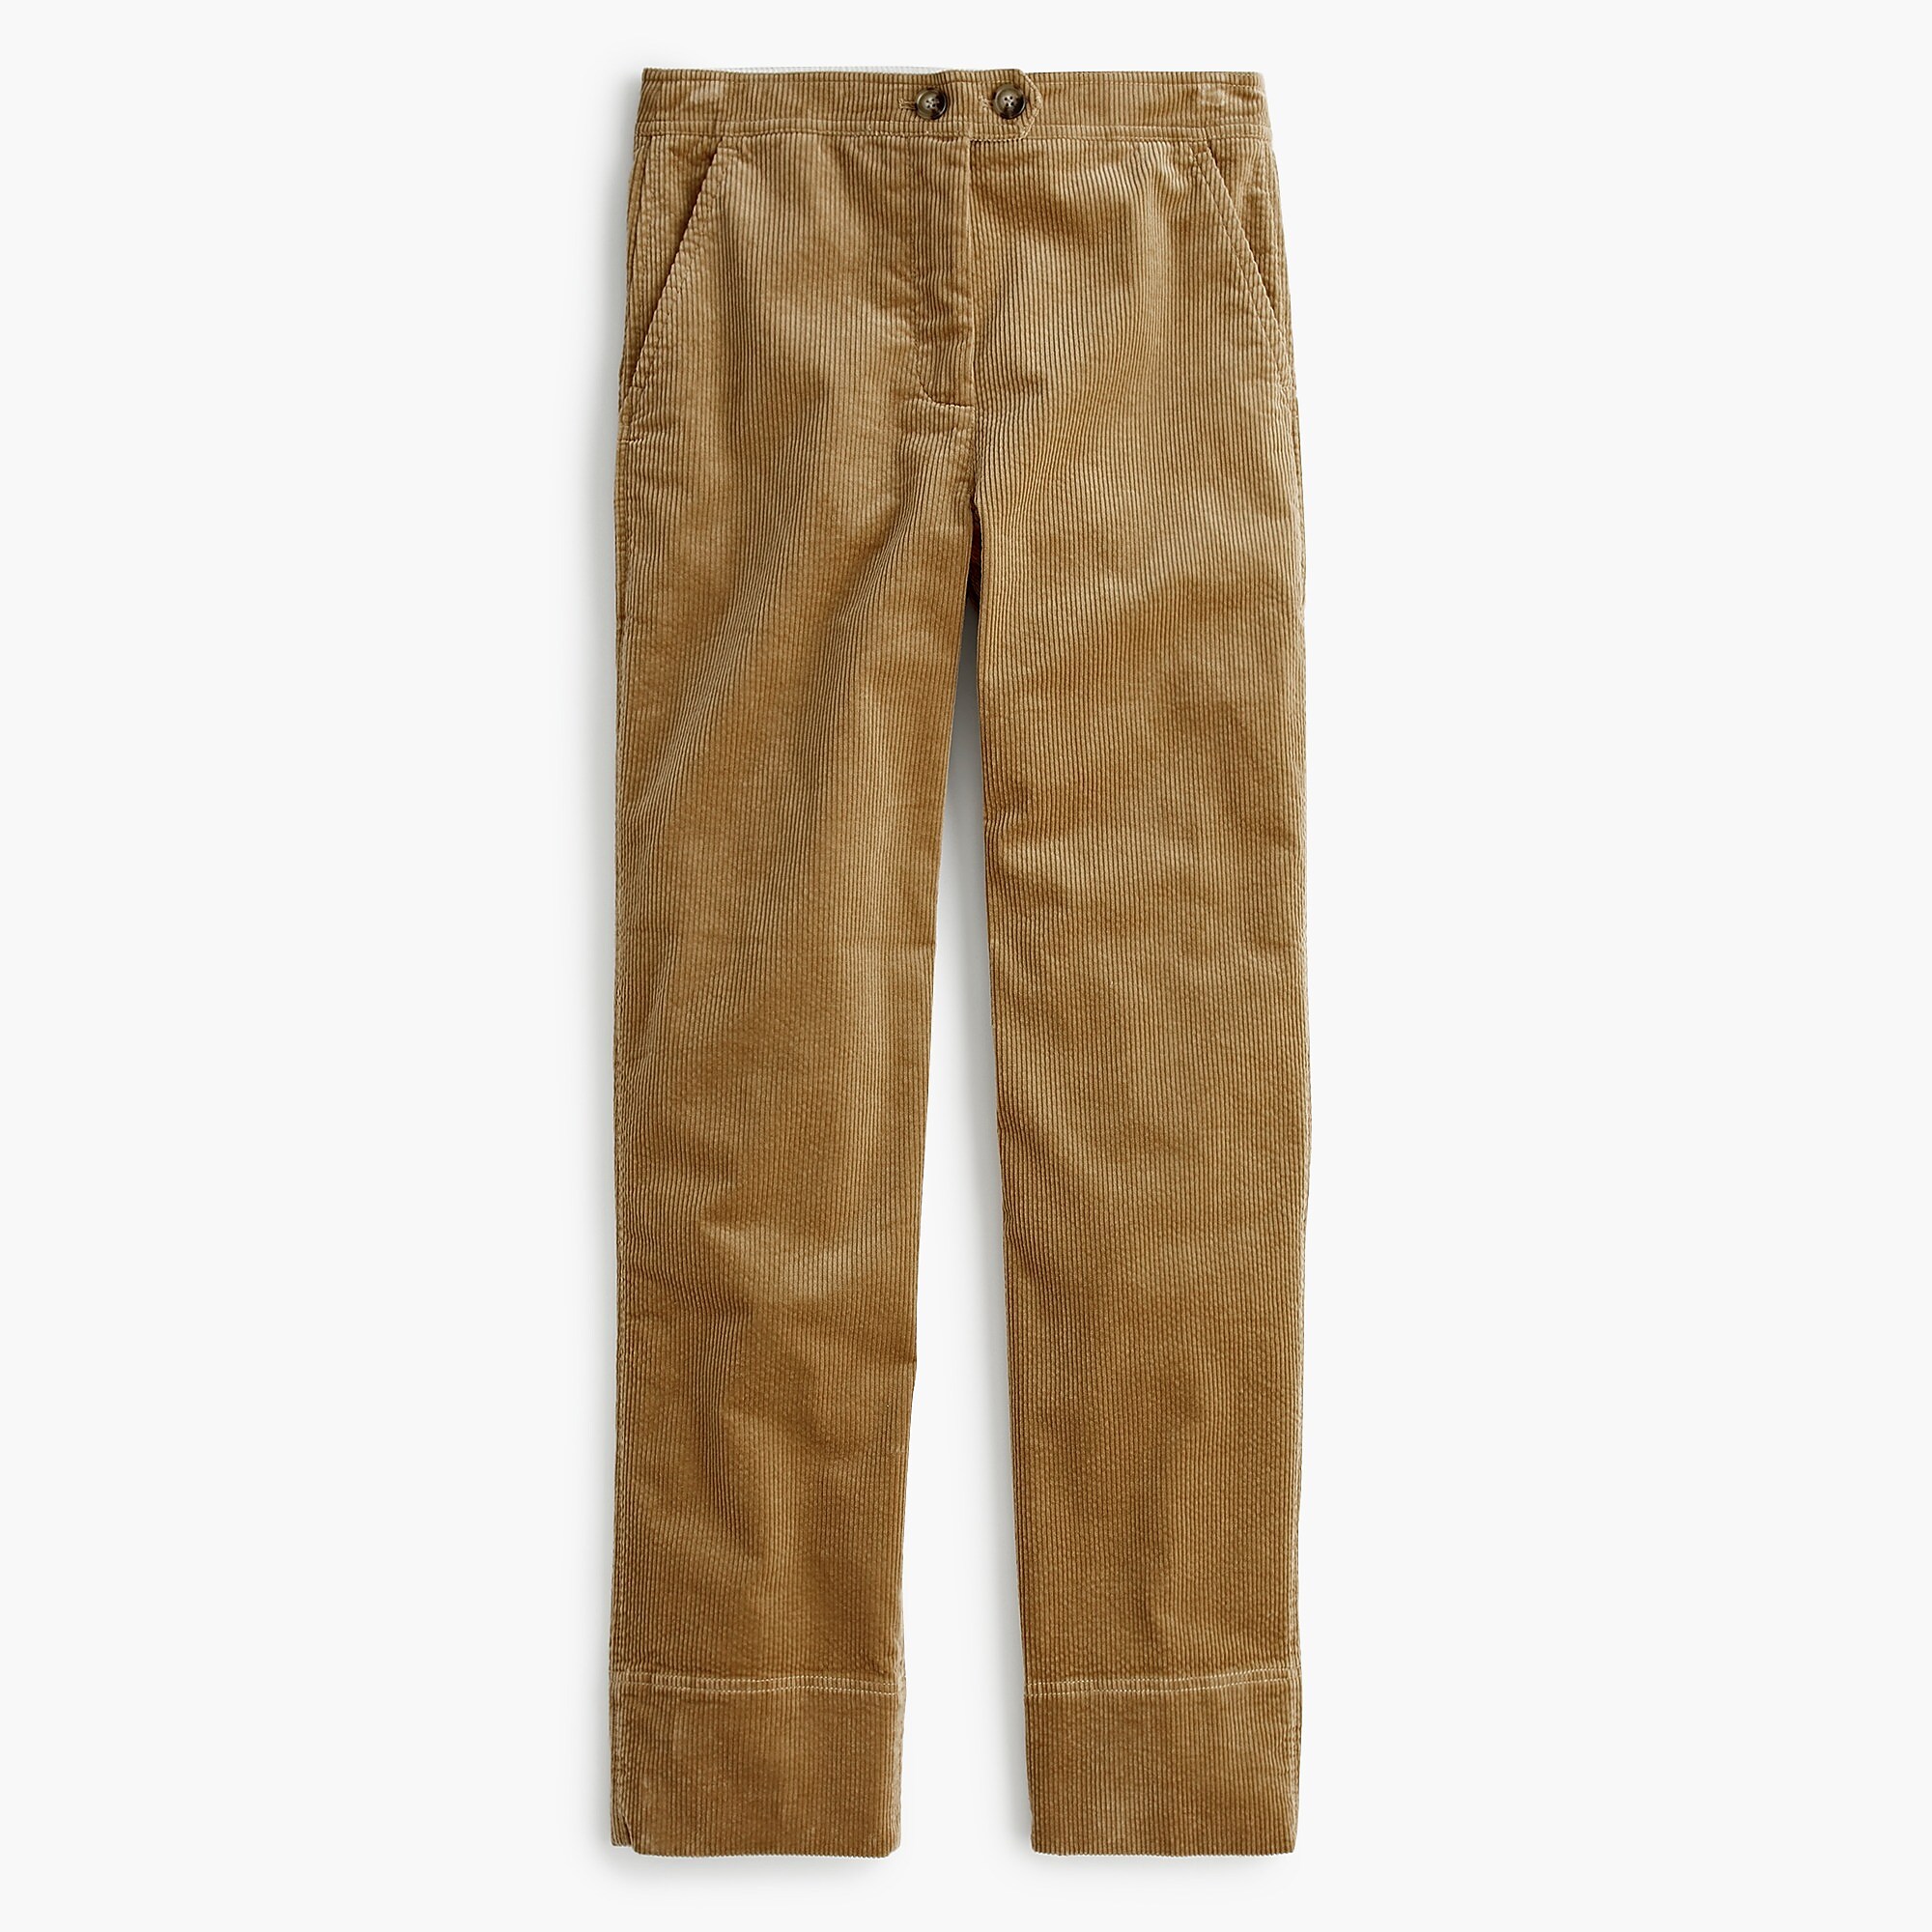 J.Crew: Stovepipe Pant In Corduroy For Women